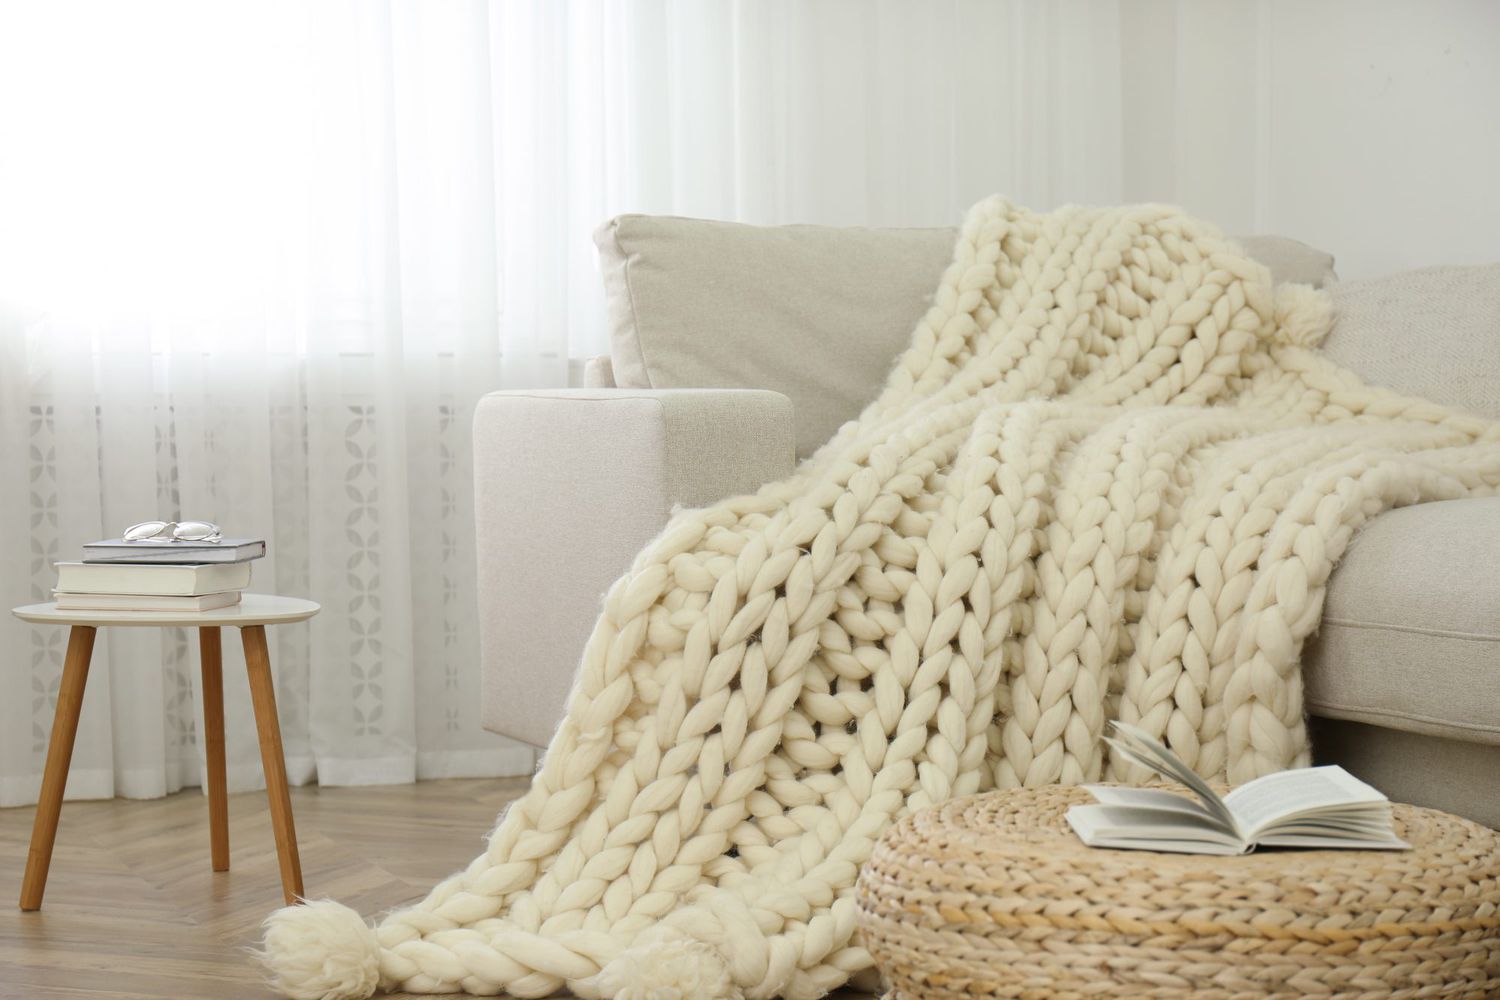 How Much Are Chunky Knit Blankets? 